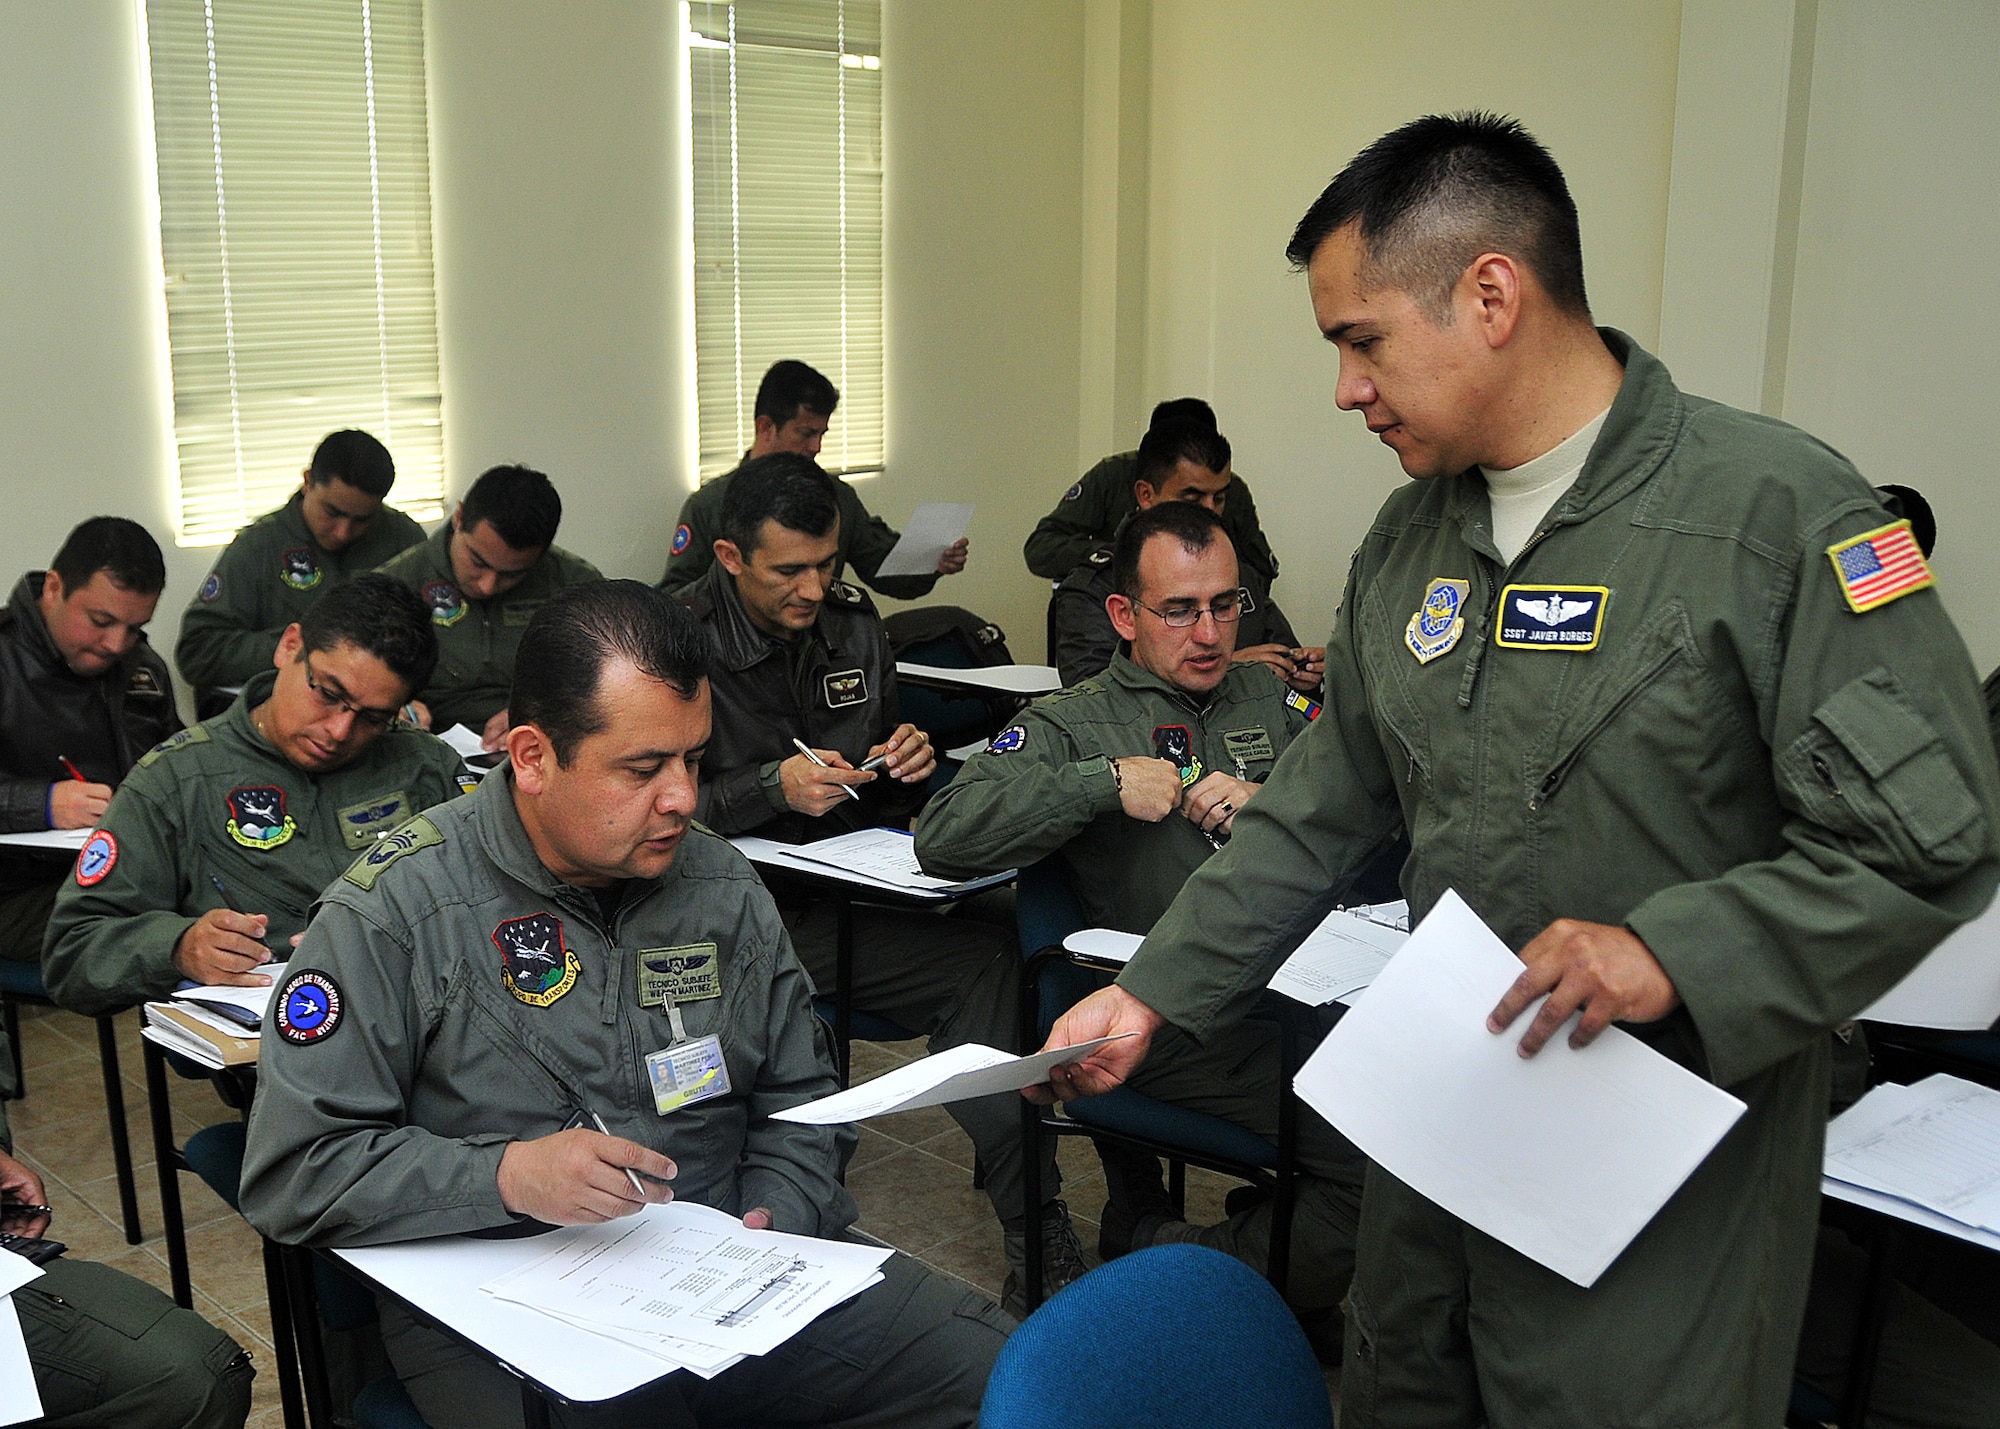 Staff Sgt. Javier Borges, 571st Mobility Support Advisory Squadron loadmaster air advisor, provides practical exercise to calculate center of balance for rolling stock handouts to Técnico Subjefe Wilson Martinez, Colombian air force, during the second day of seminars June 6 at Commando Aéreo de Transporte Militar, Bogota, Colombia.  Rolling stock is vehicles, trailers or generators loaded onto aircraft.  (U.S. Air Force photo by Tech. Sgt. Lesley Waters)